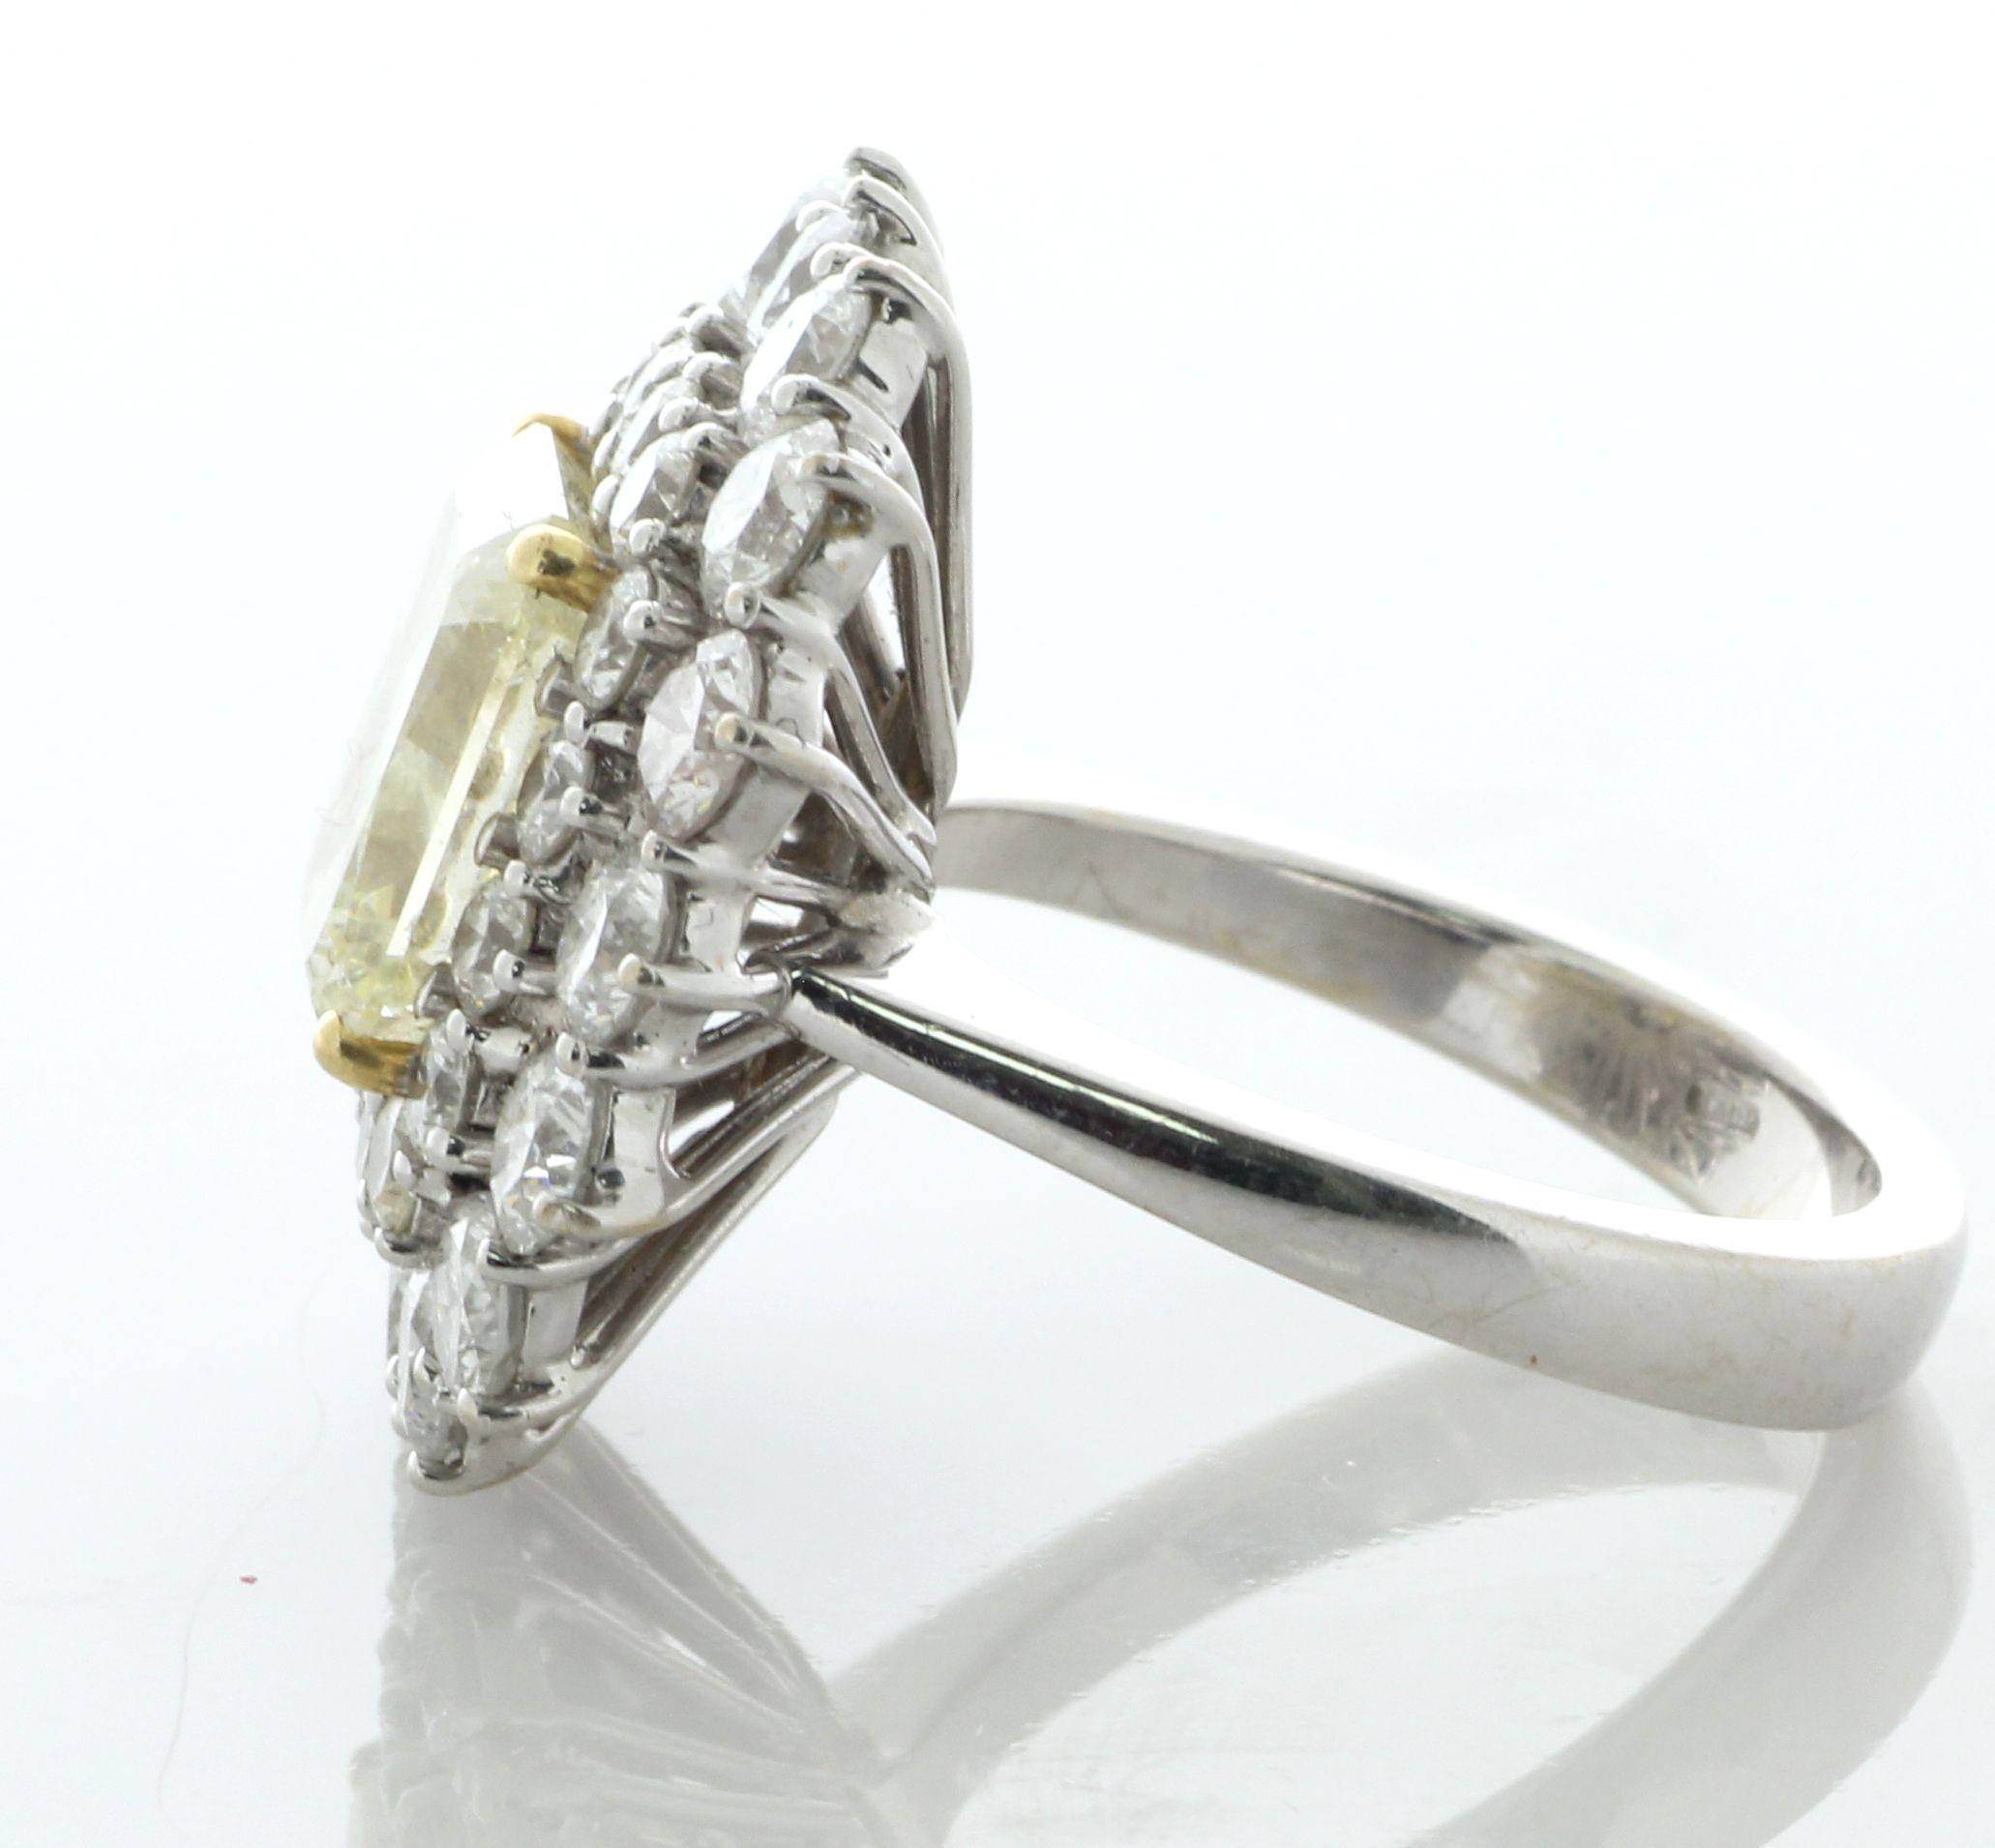 18ct White Gold Radiant Cut Fancy Cluster Diamond Ring (4.58) 2.88 Carats - Valued By AGI £118,725. - Image 4 of 8